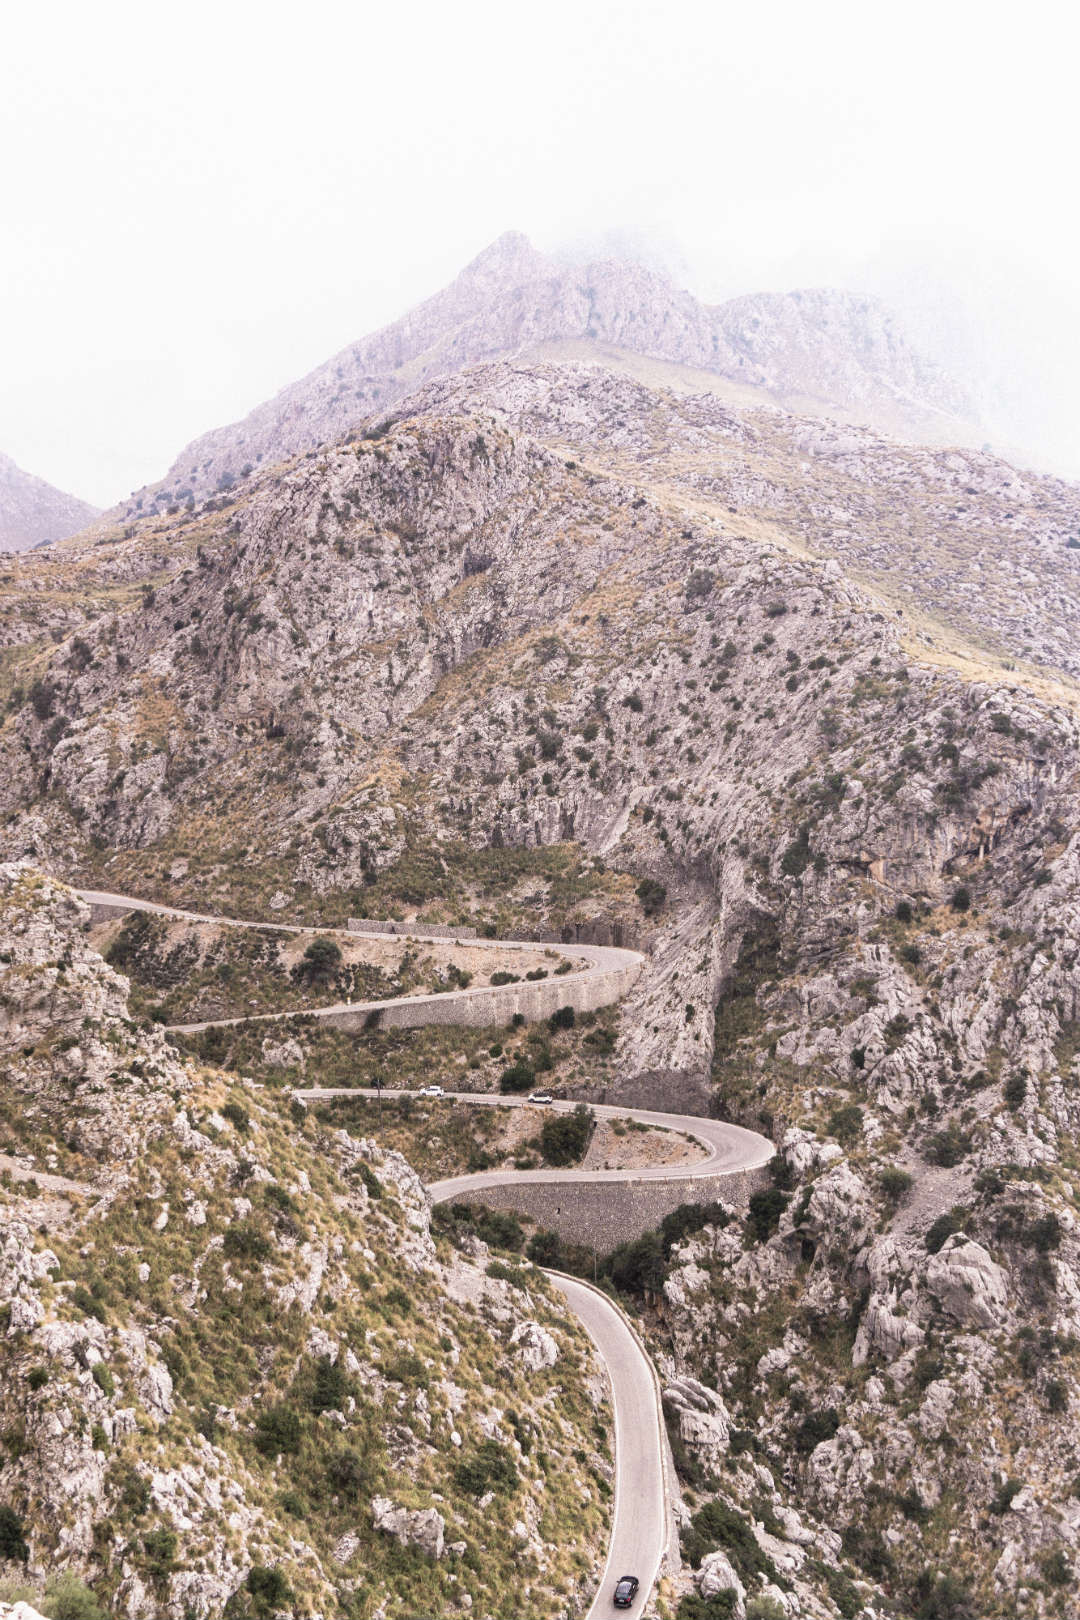 A close up of the road and switchbacks winding through the mountains that you'll experience on your road trip to sa calobra in Mallorca